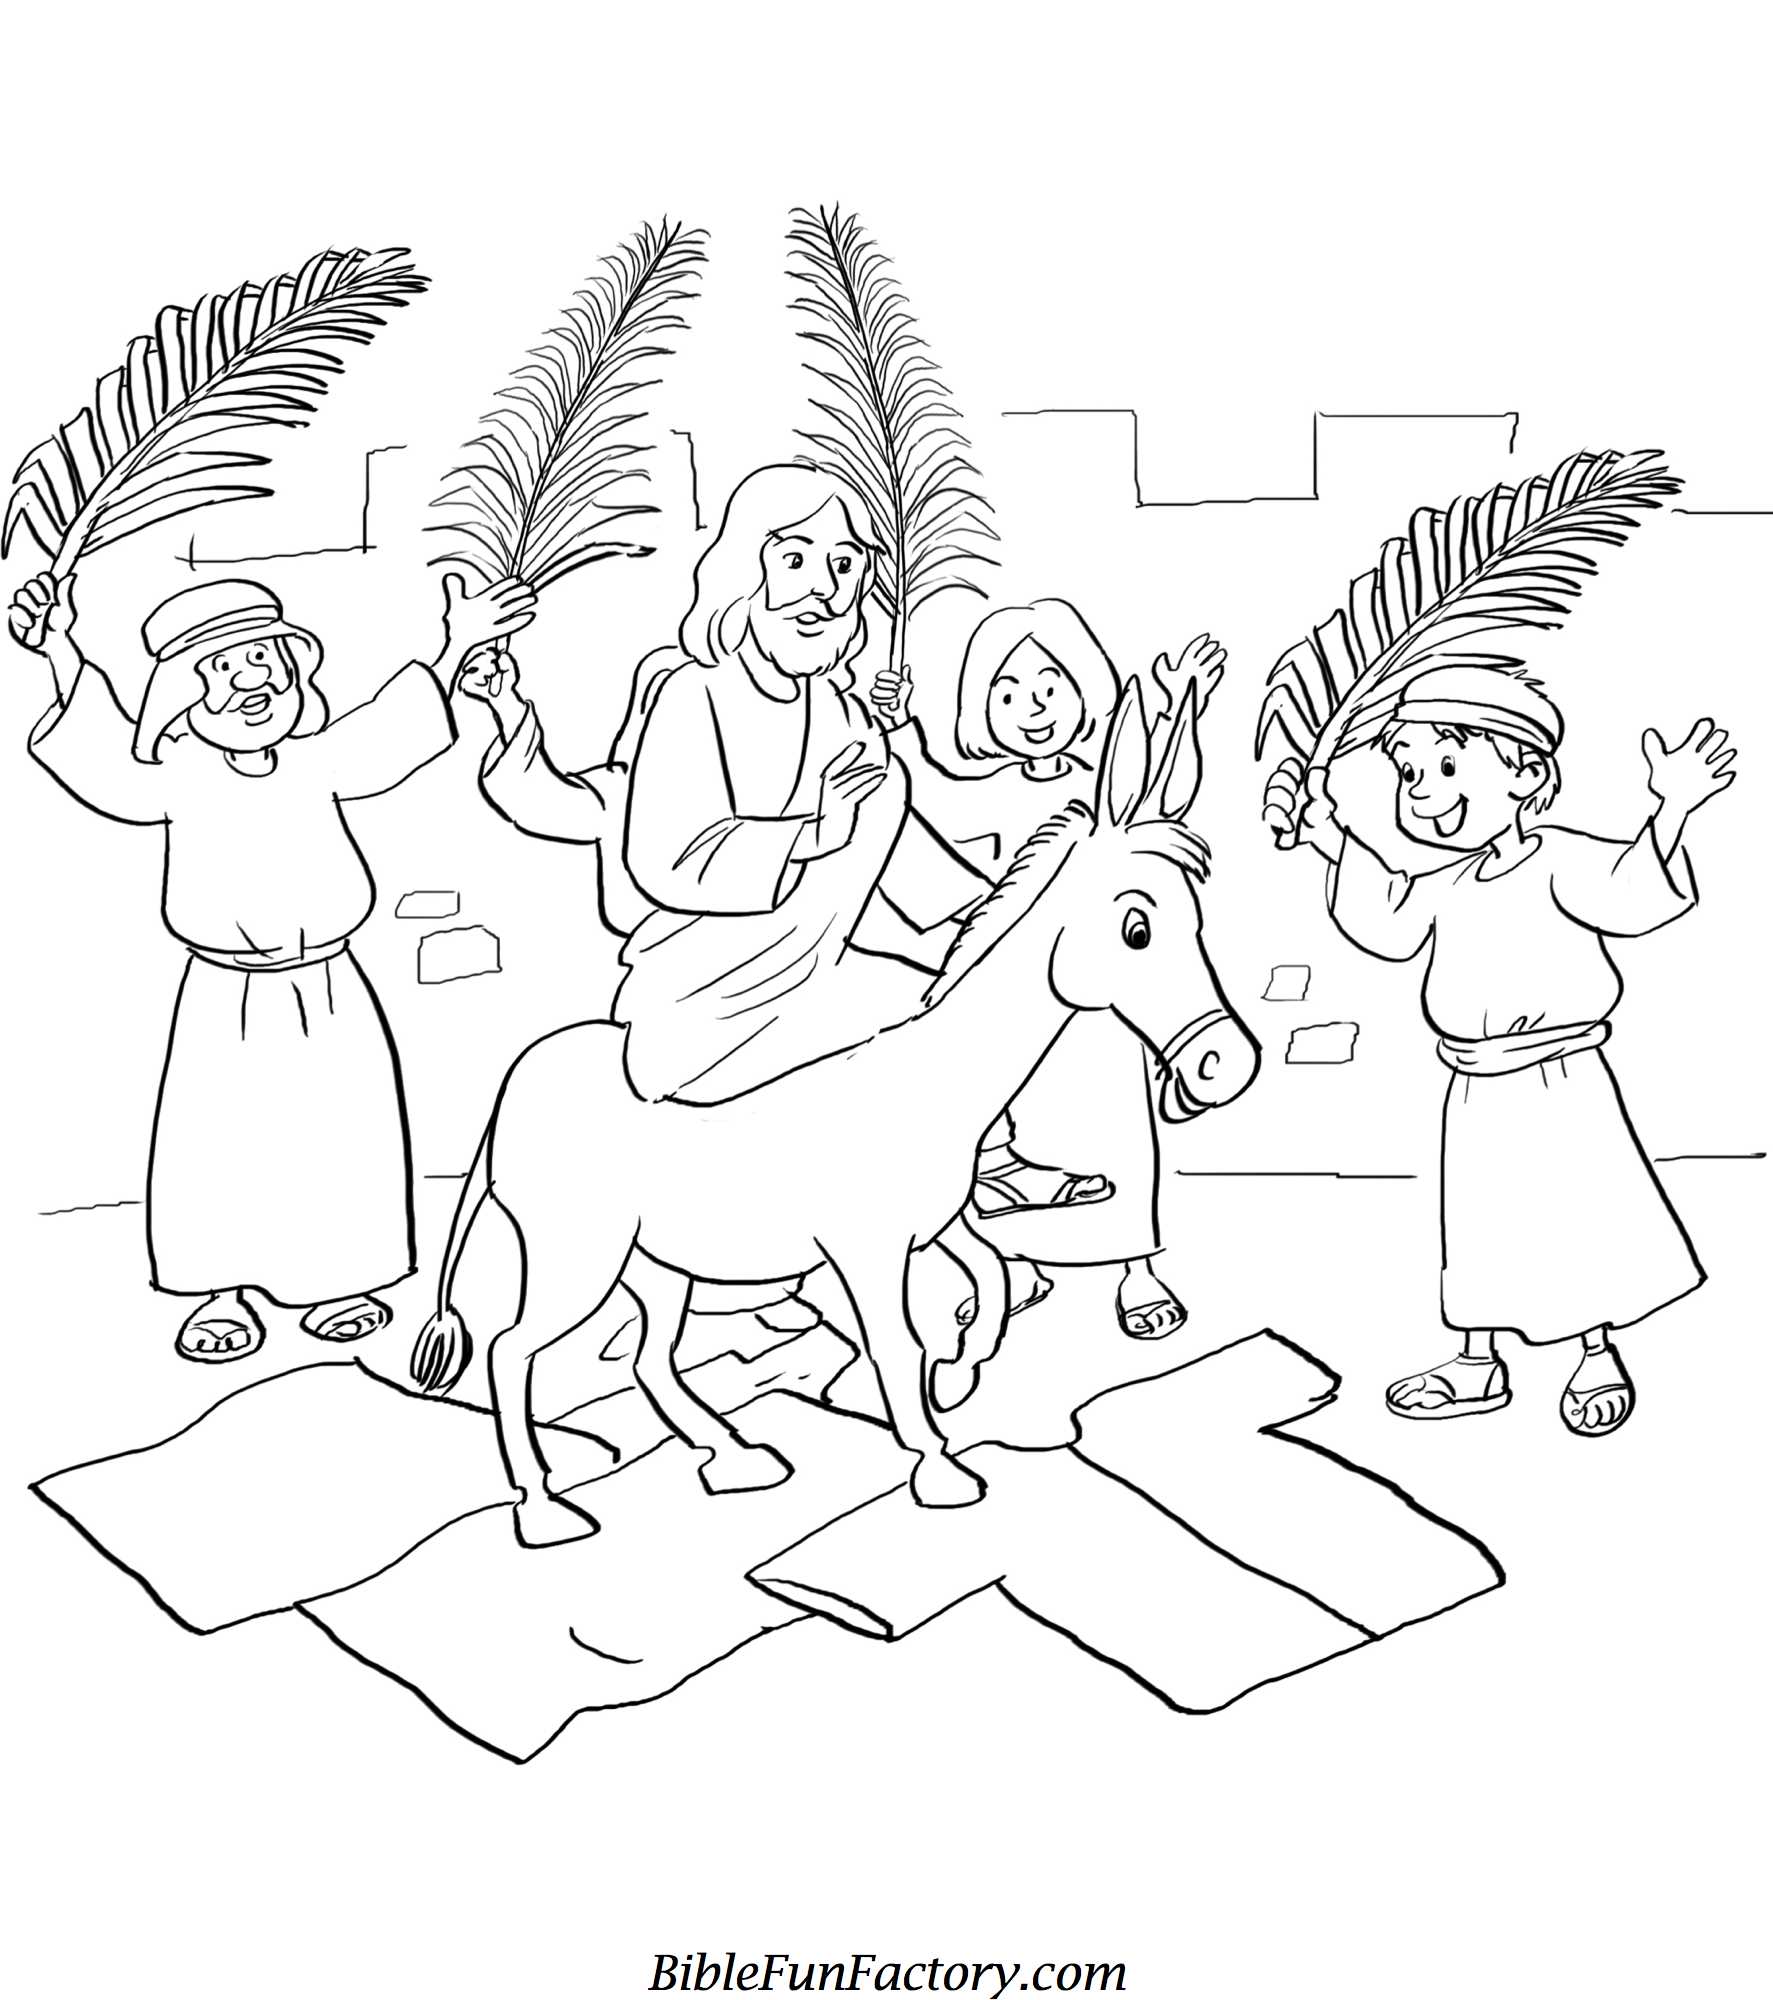 free bible coloring sheets | Bible Lessons, Games and Activities |  BibleFunFactory.com